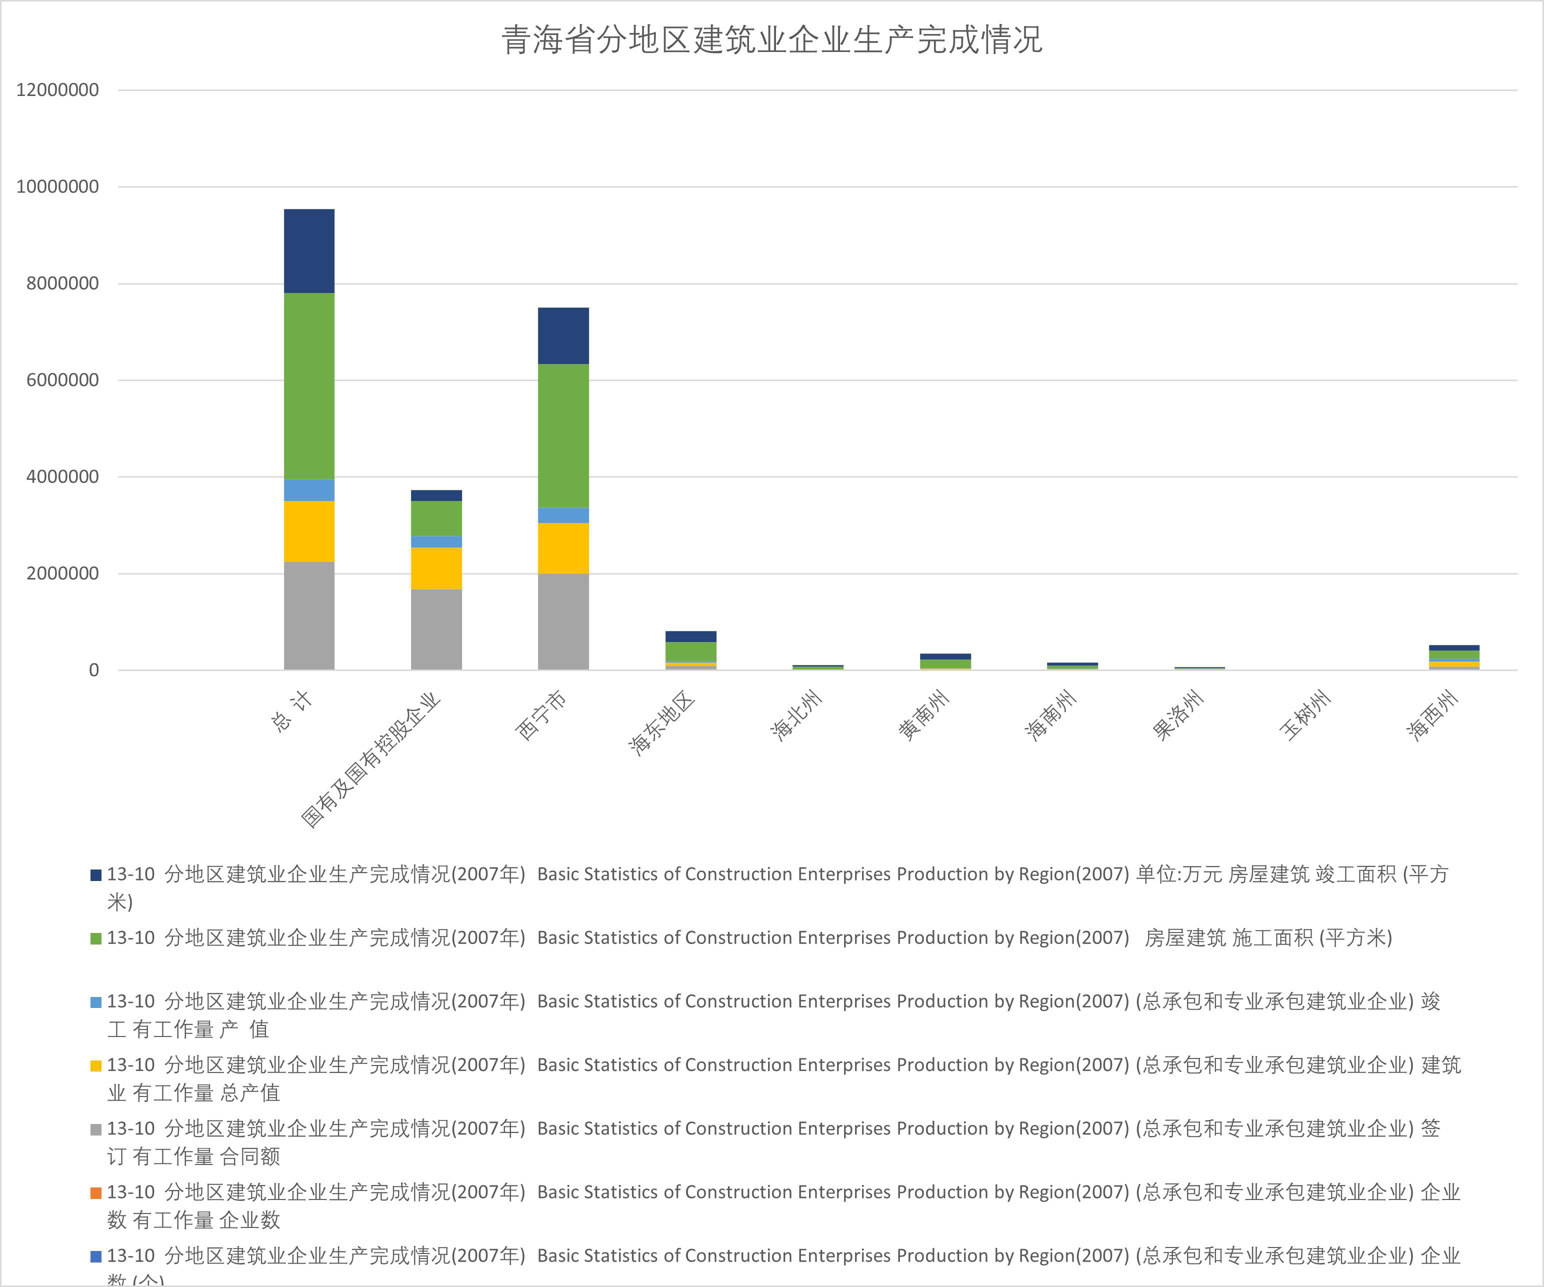 Production completion of construction enterprises in different regions of Qinghai Province (2004-2007)